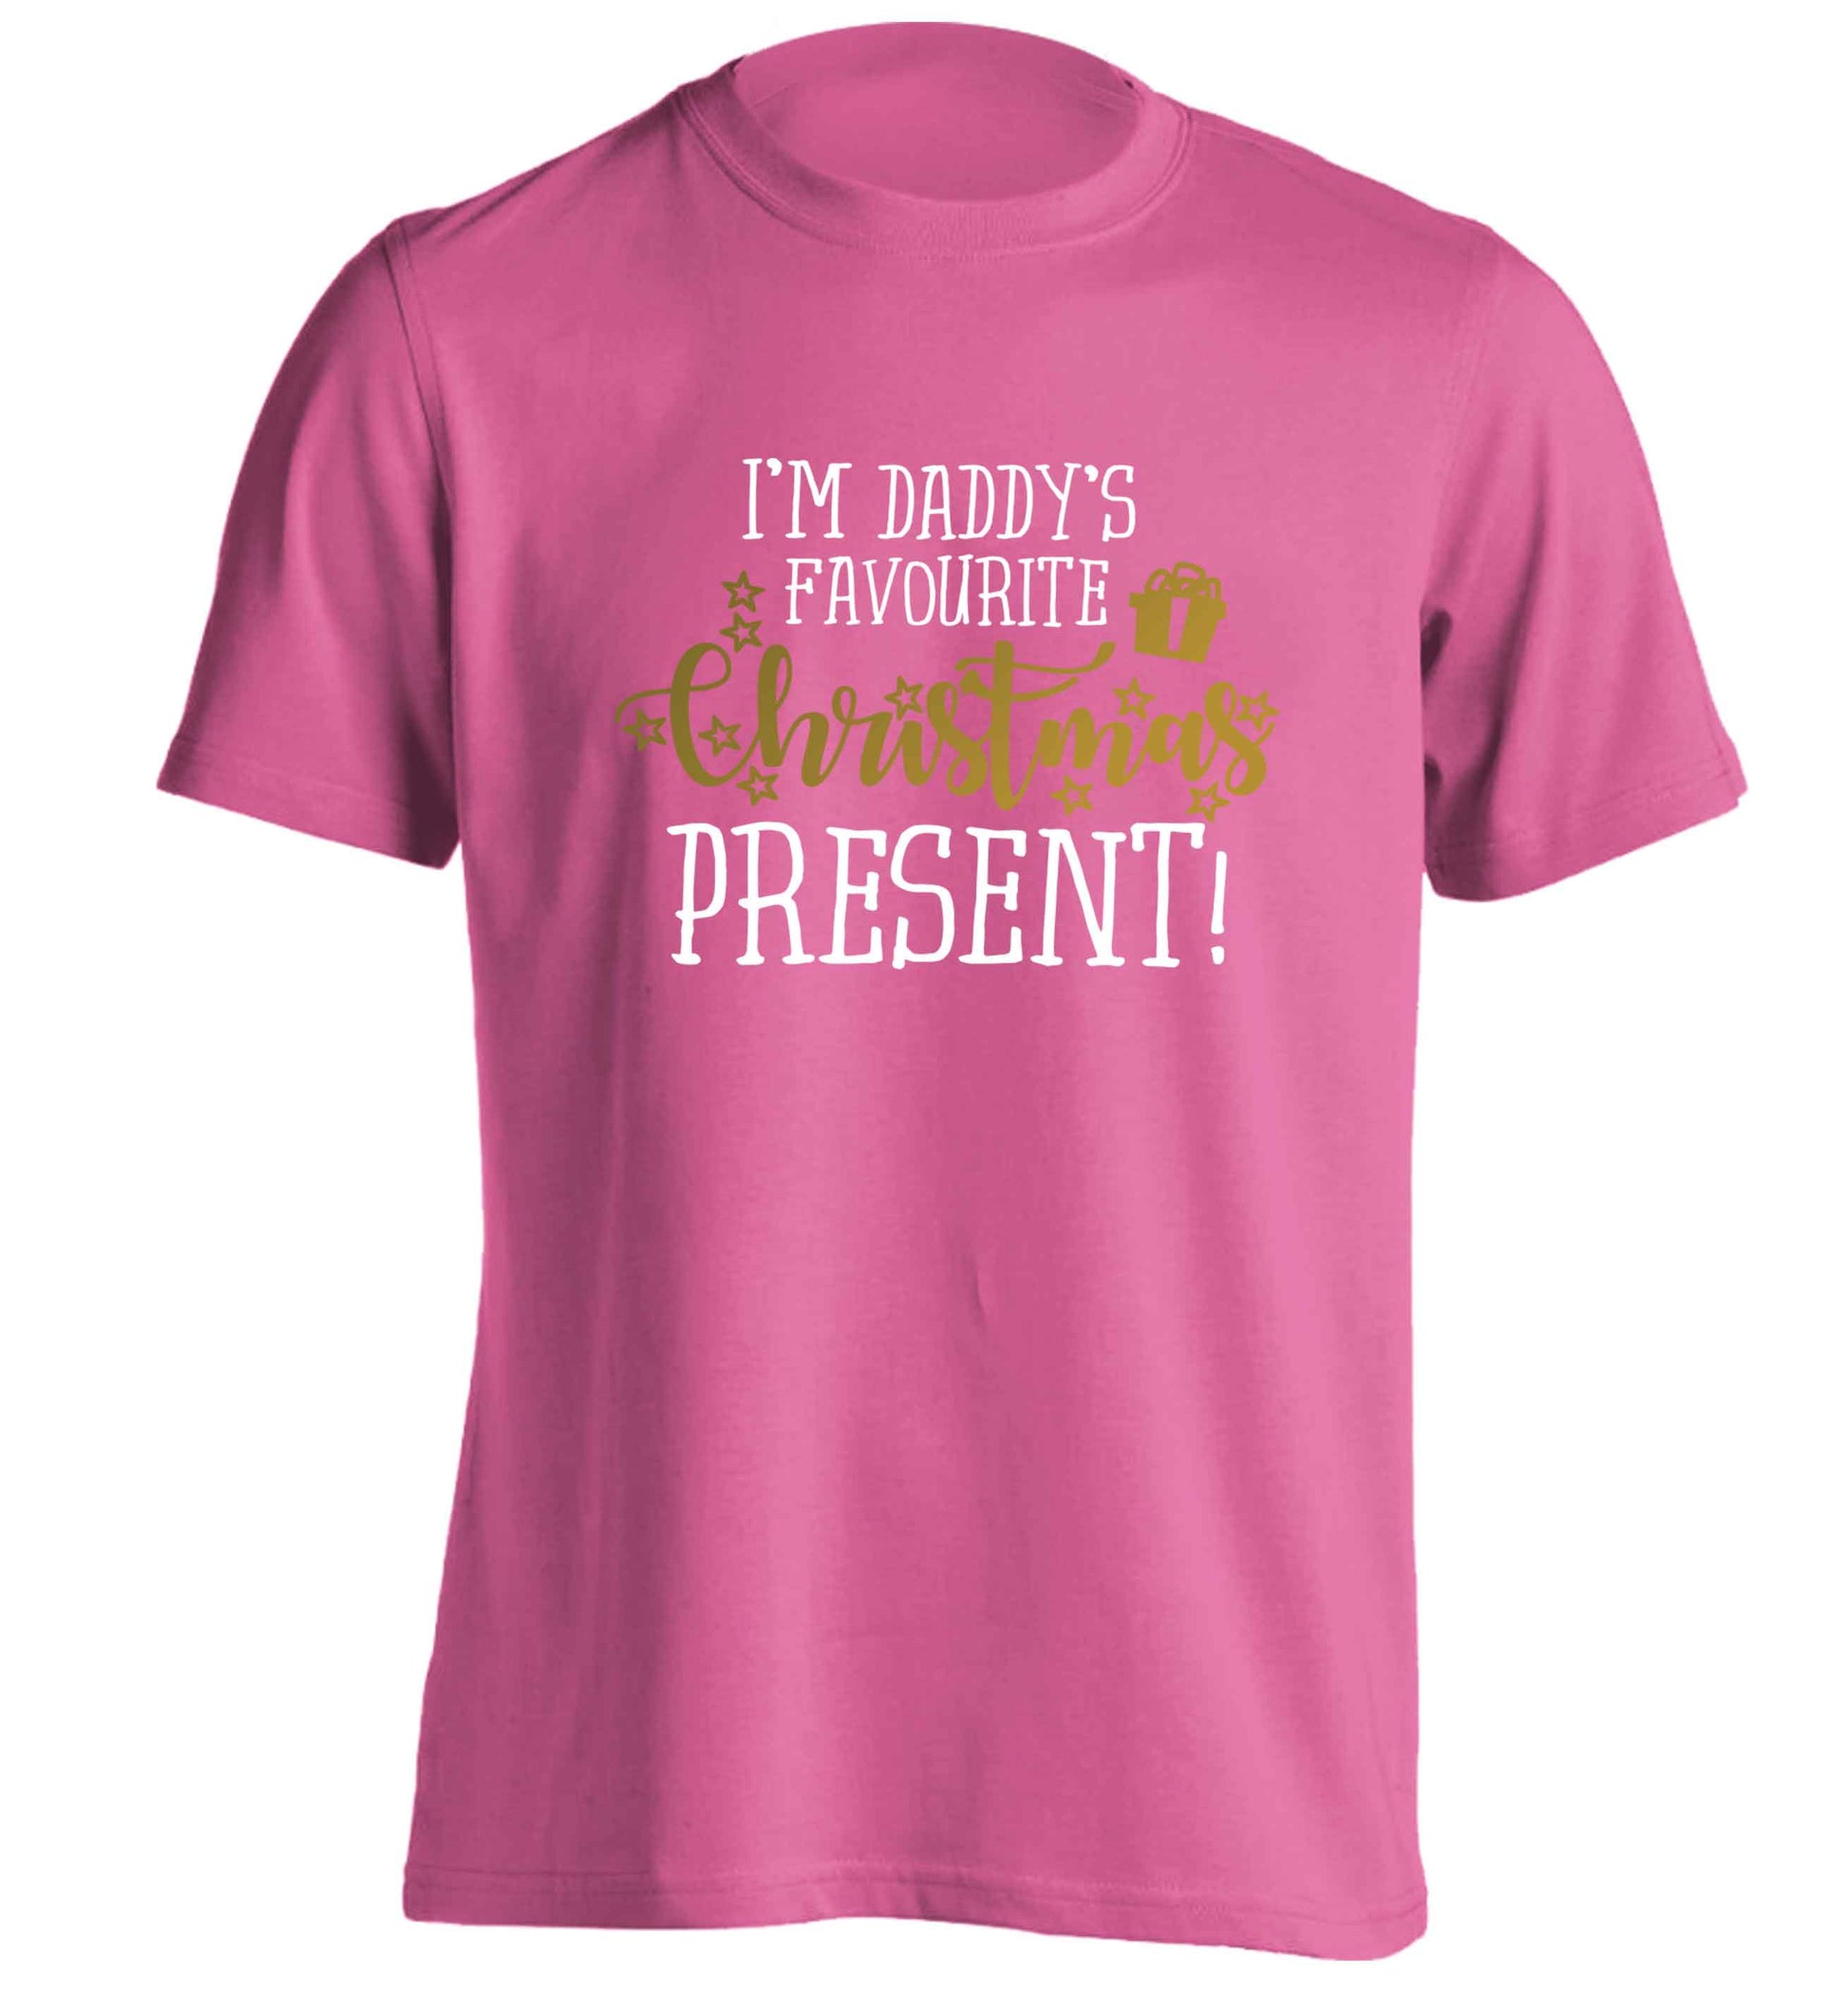 Daddy's favourite Christmas present adults unisex pink Tshirt 2XL